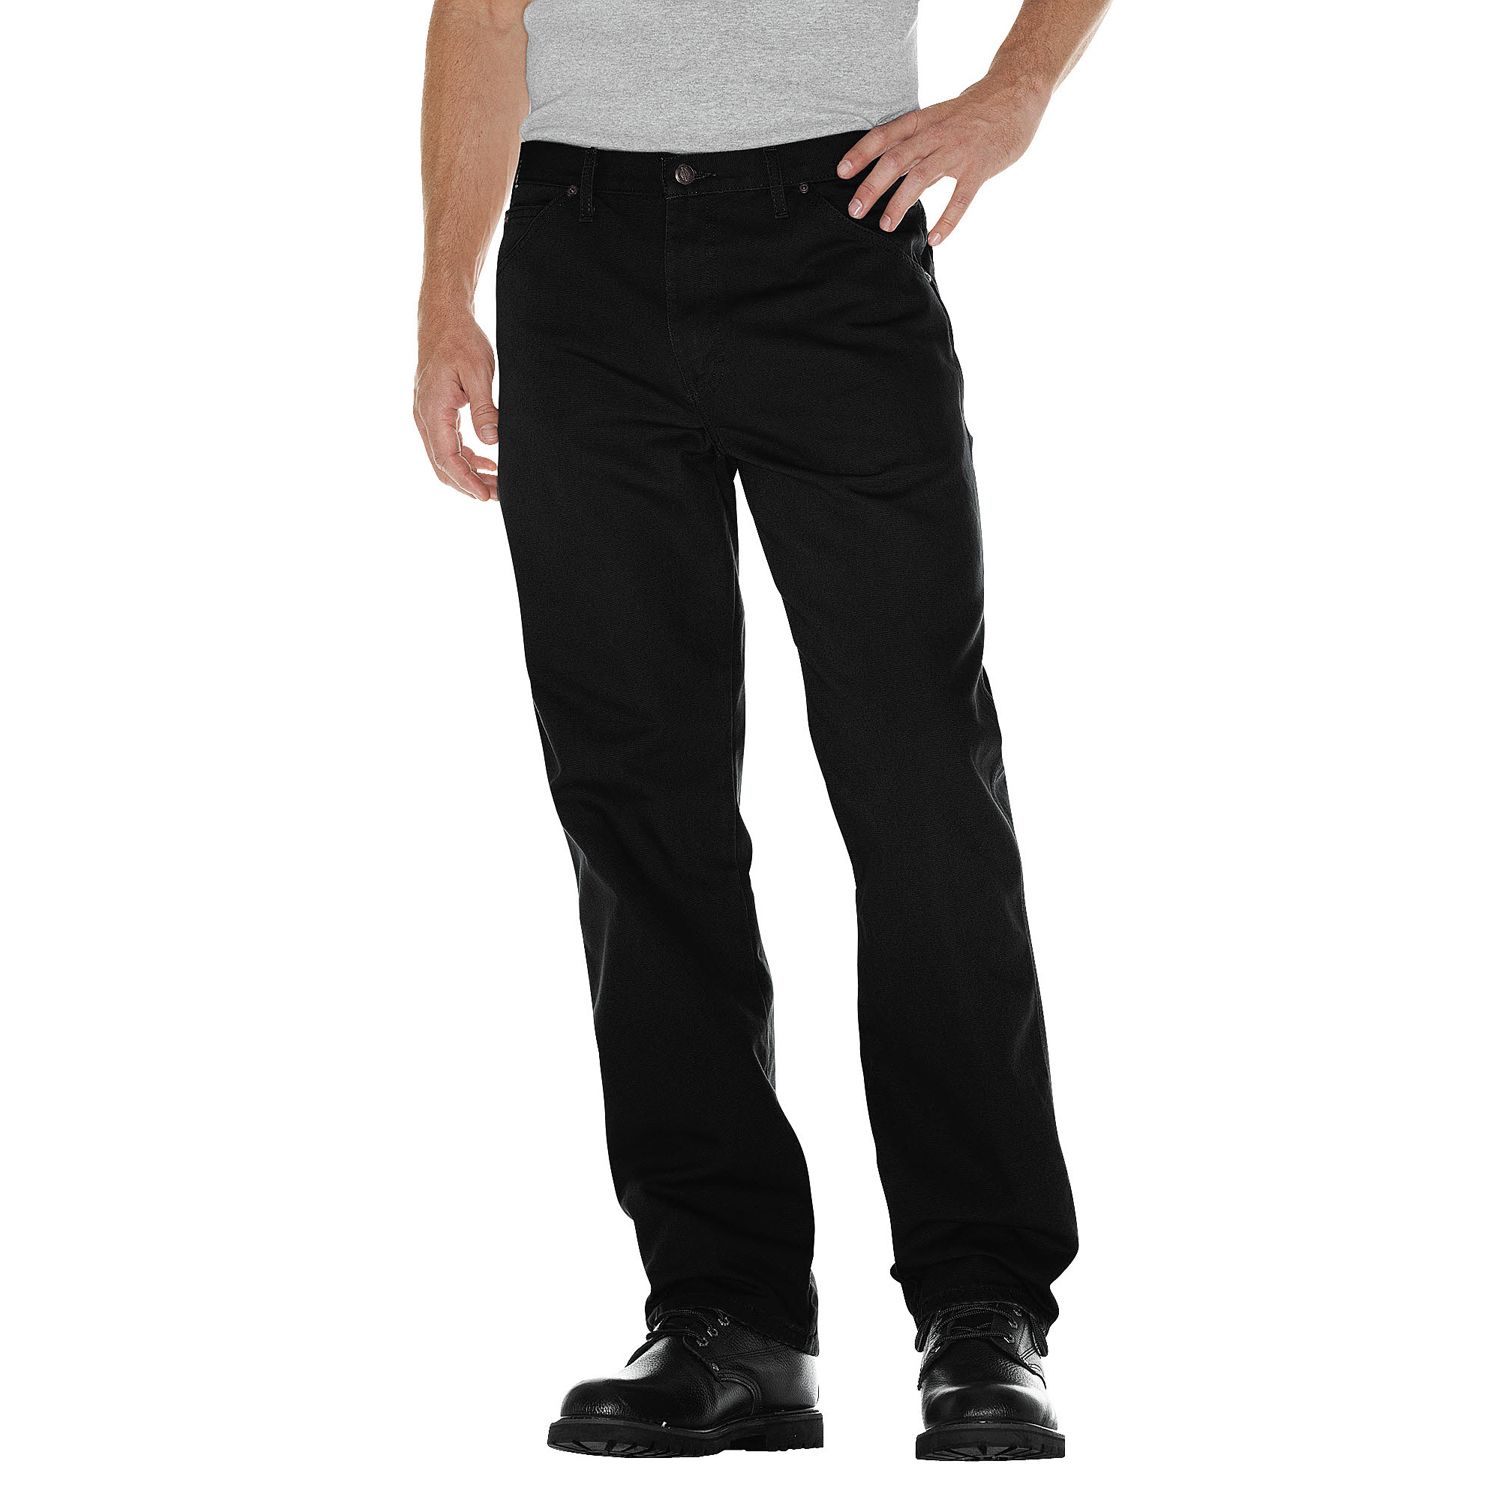 dickies men's relaxed fit carpenter jeans